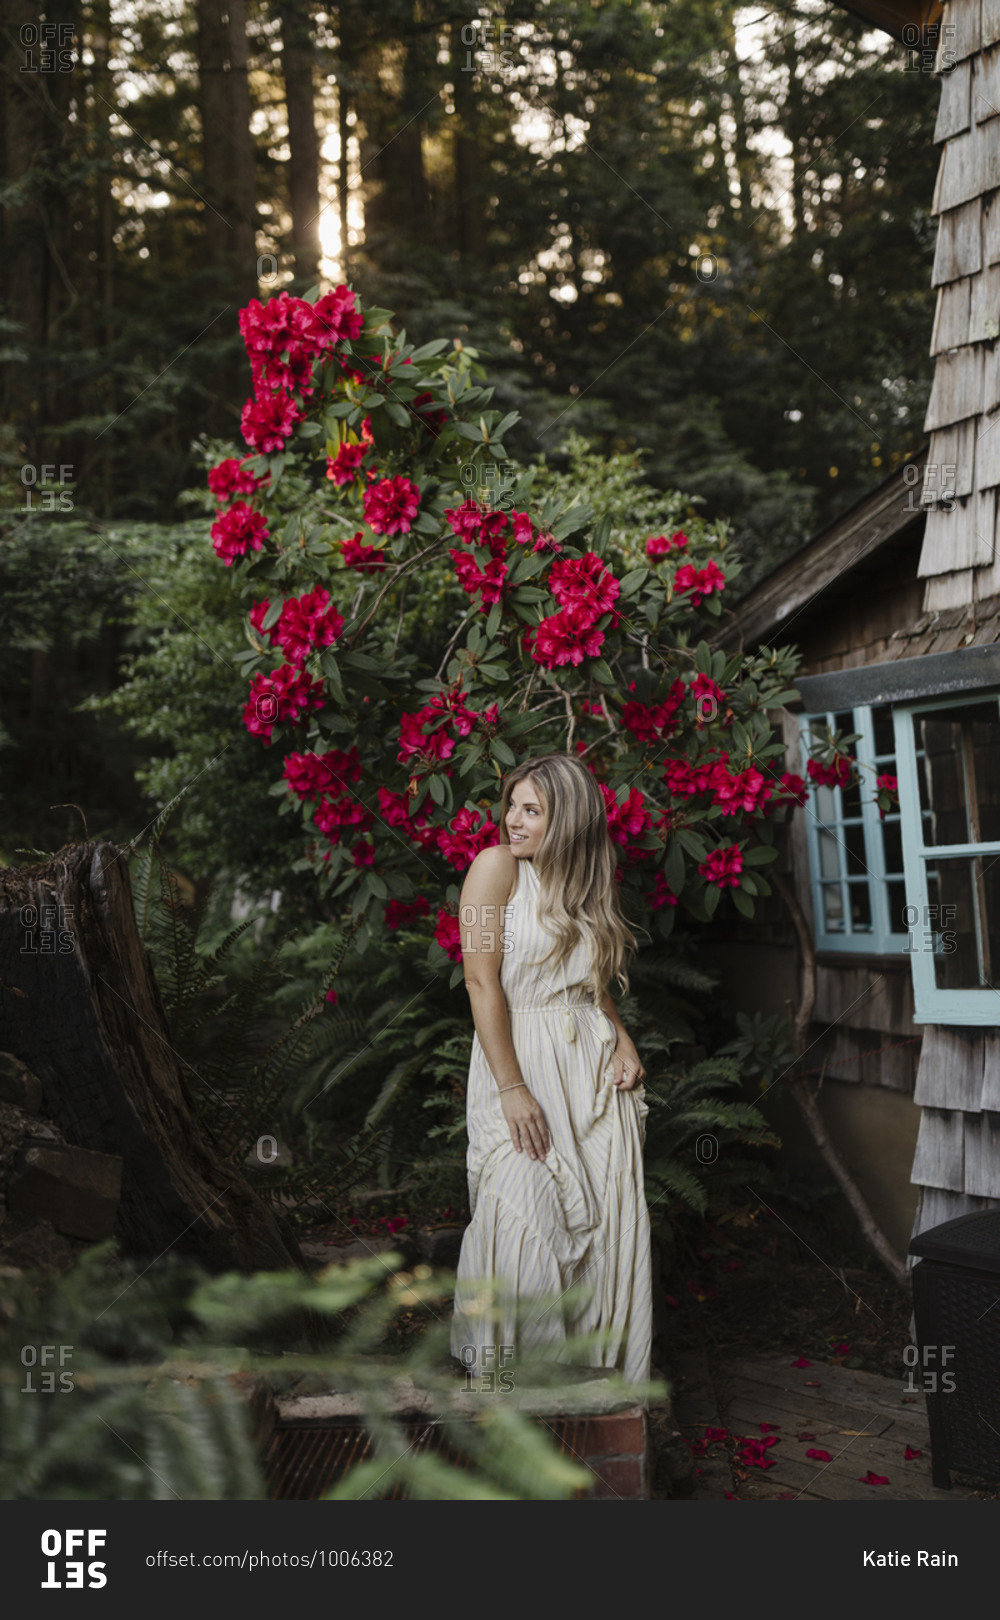 Woman standing in front of a large flowering shrub by a cabin in the woods